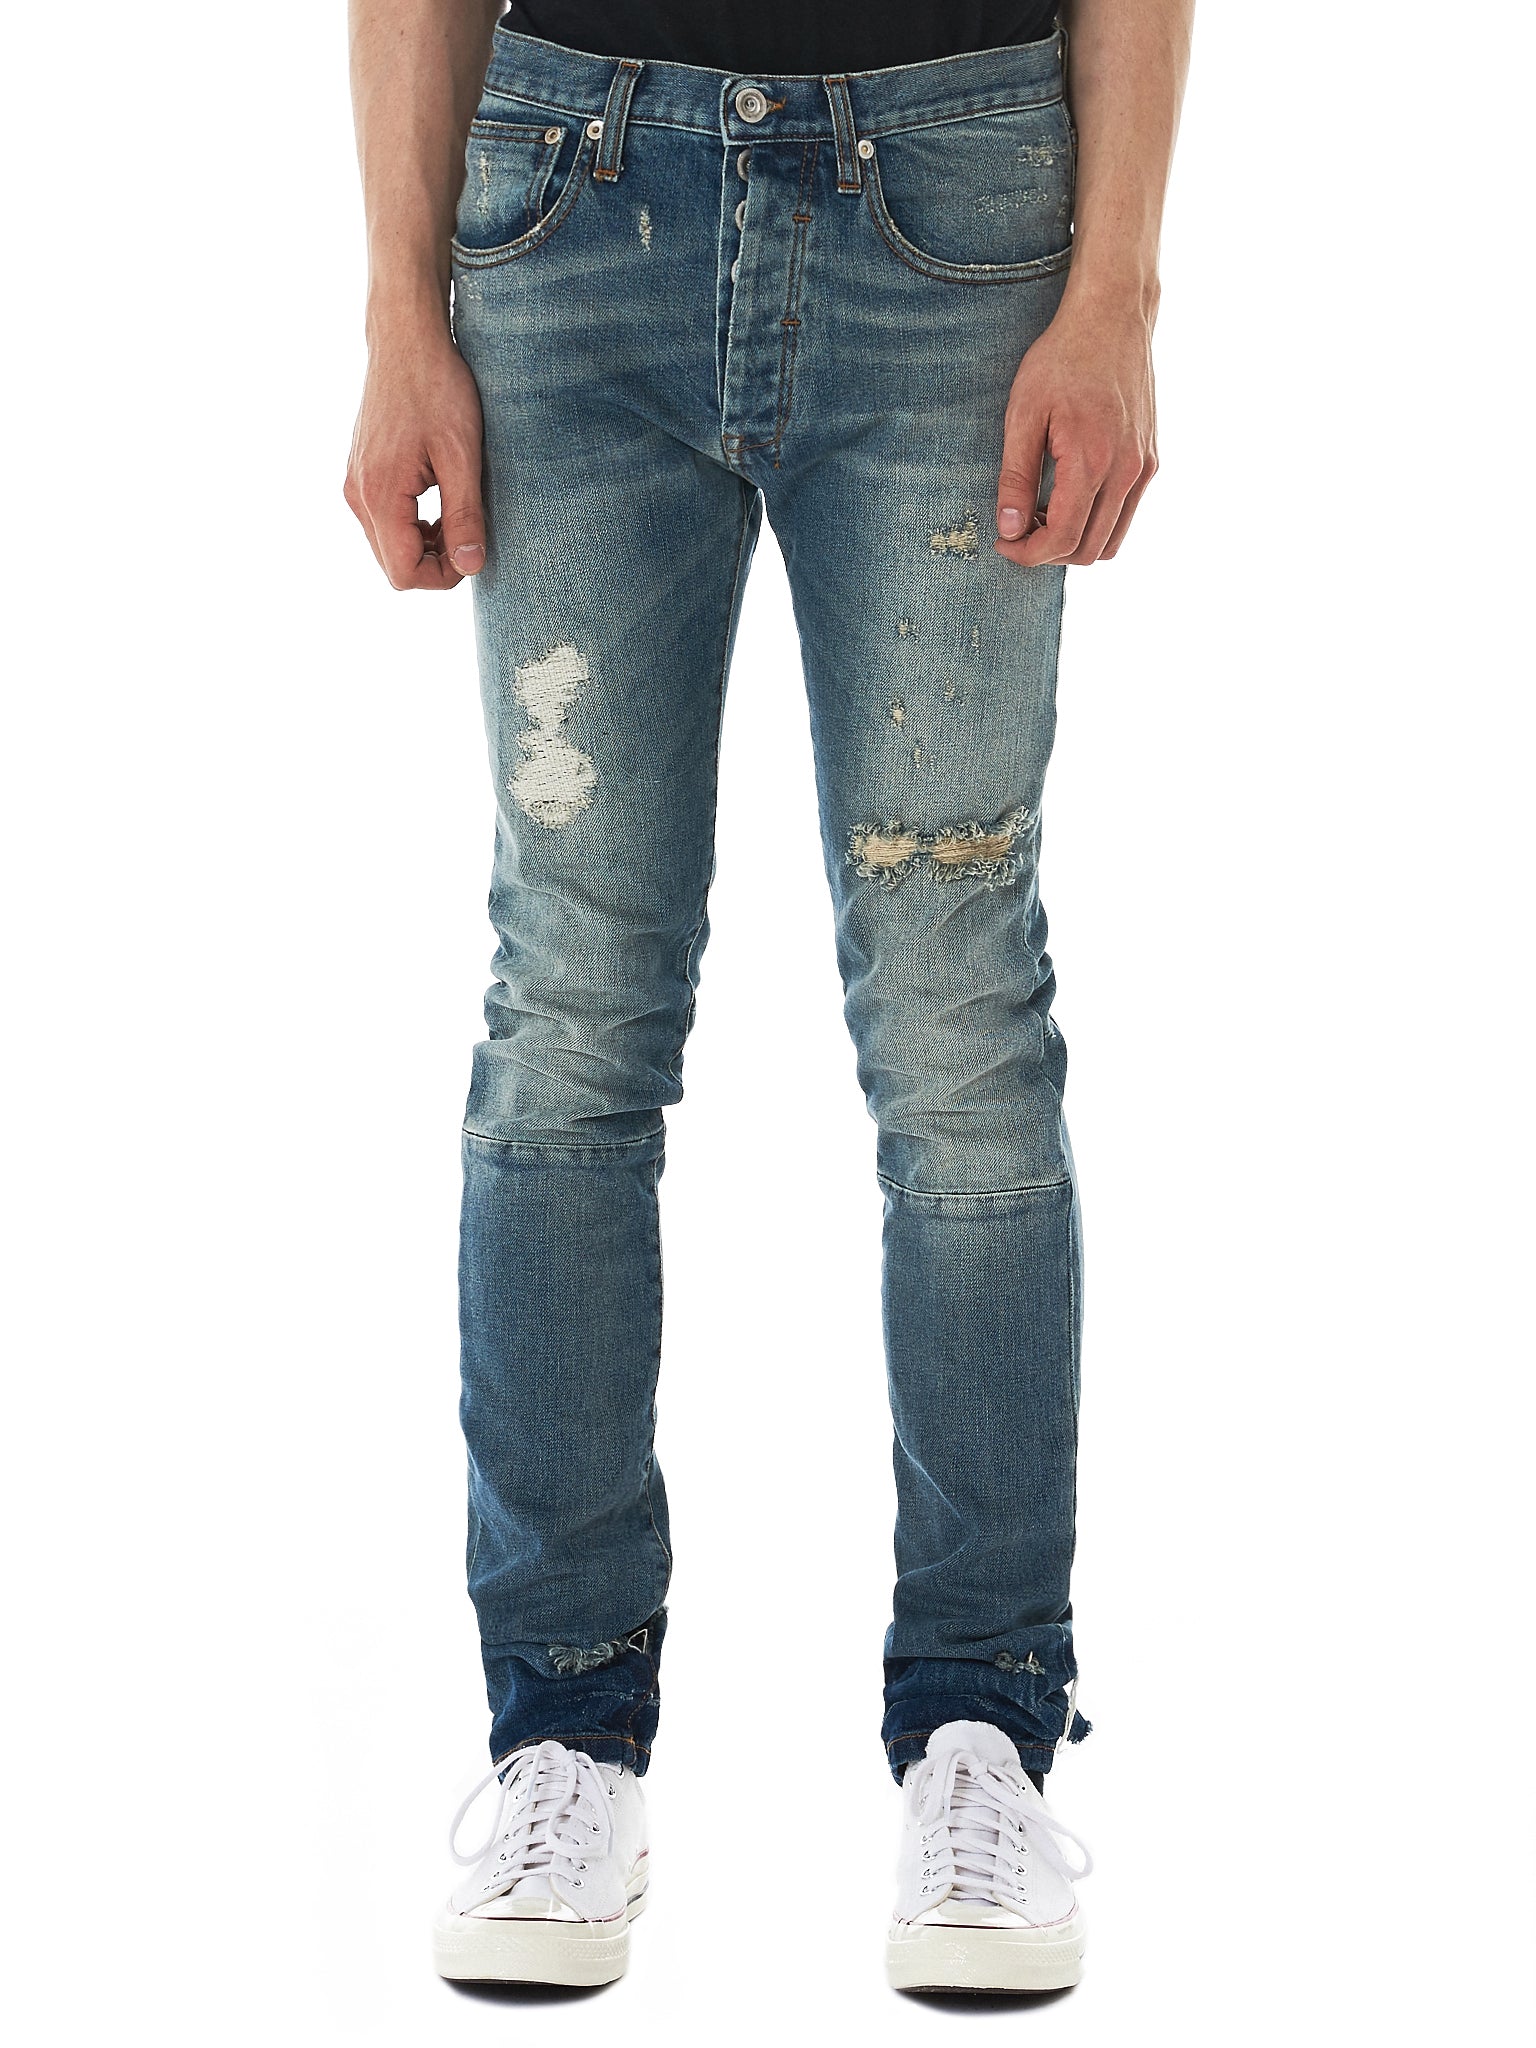 Unravel Distressed Jeans - Hlorenzo Front